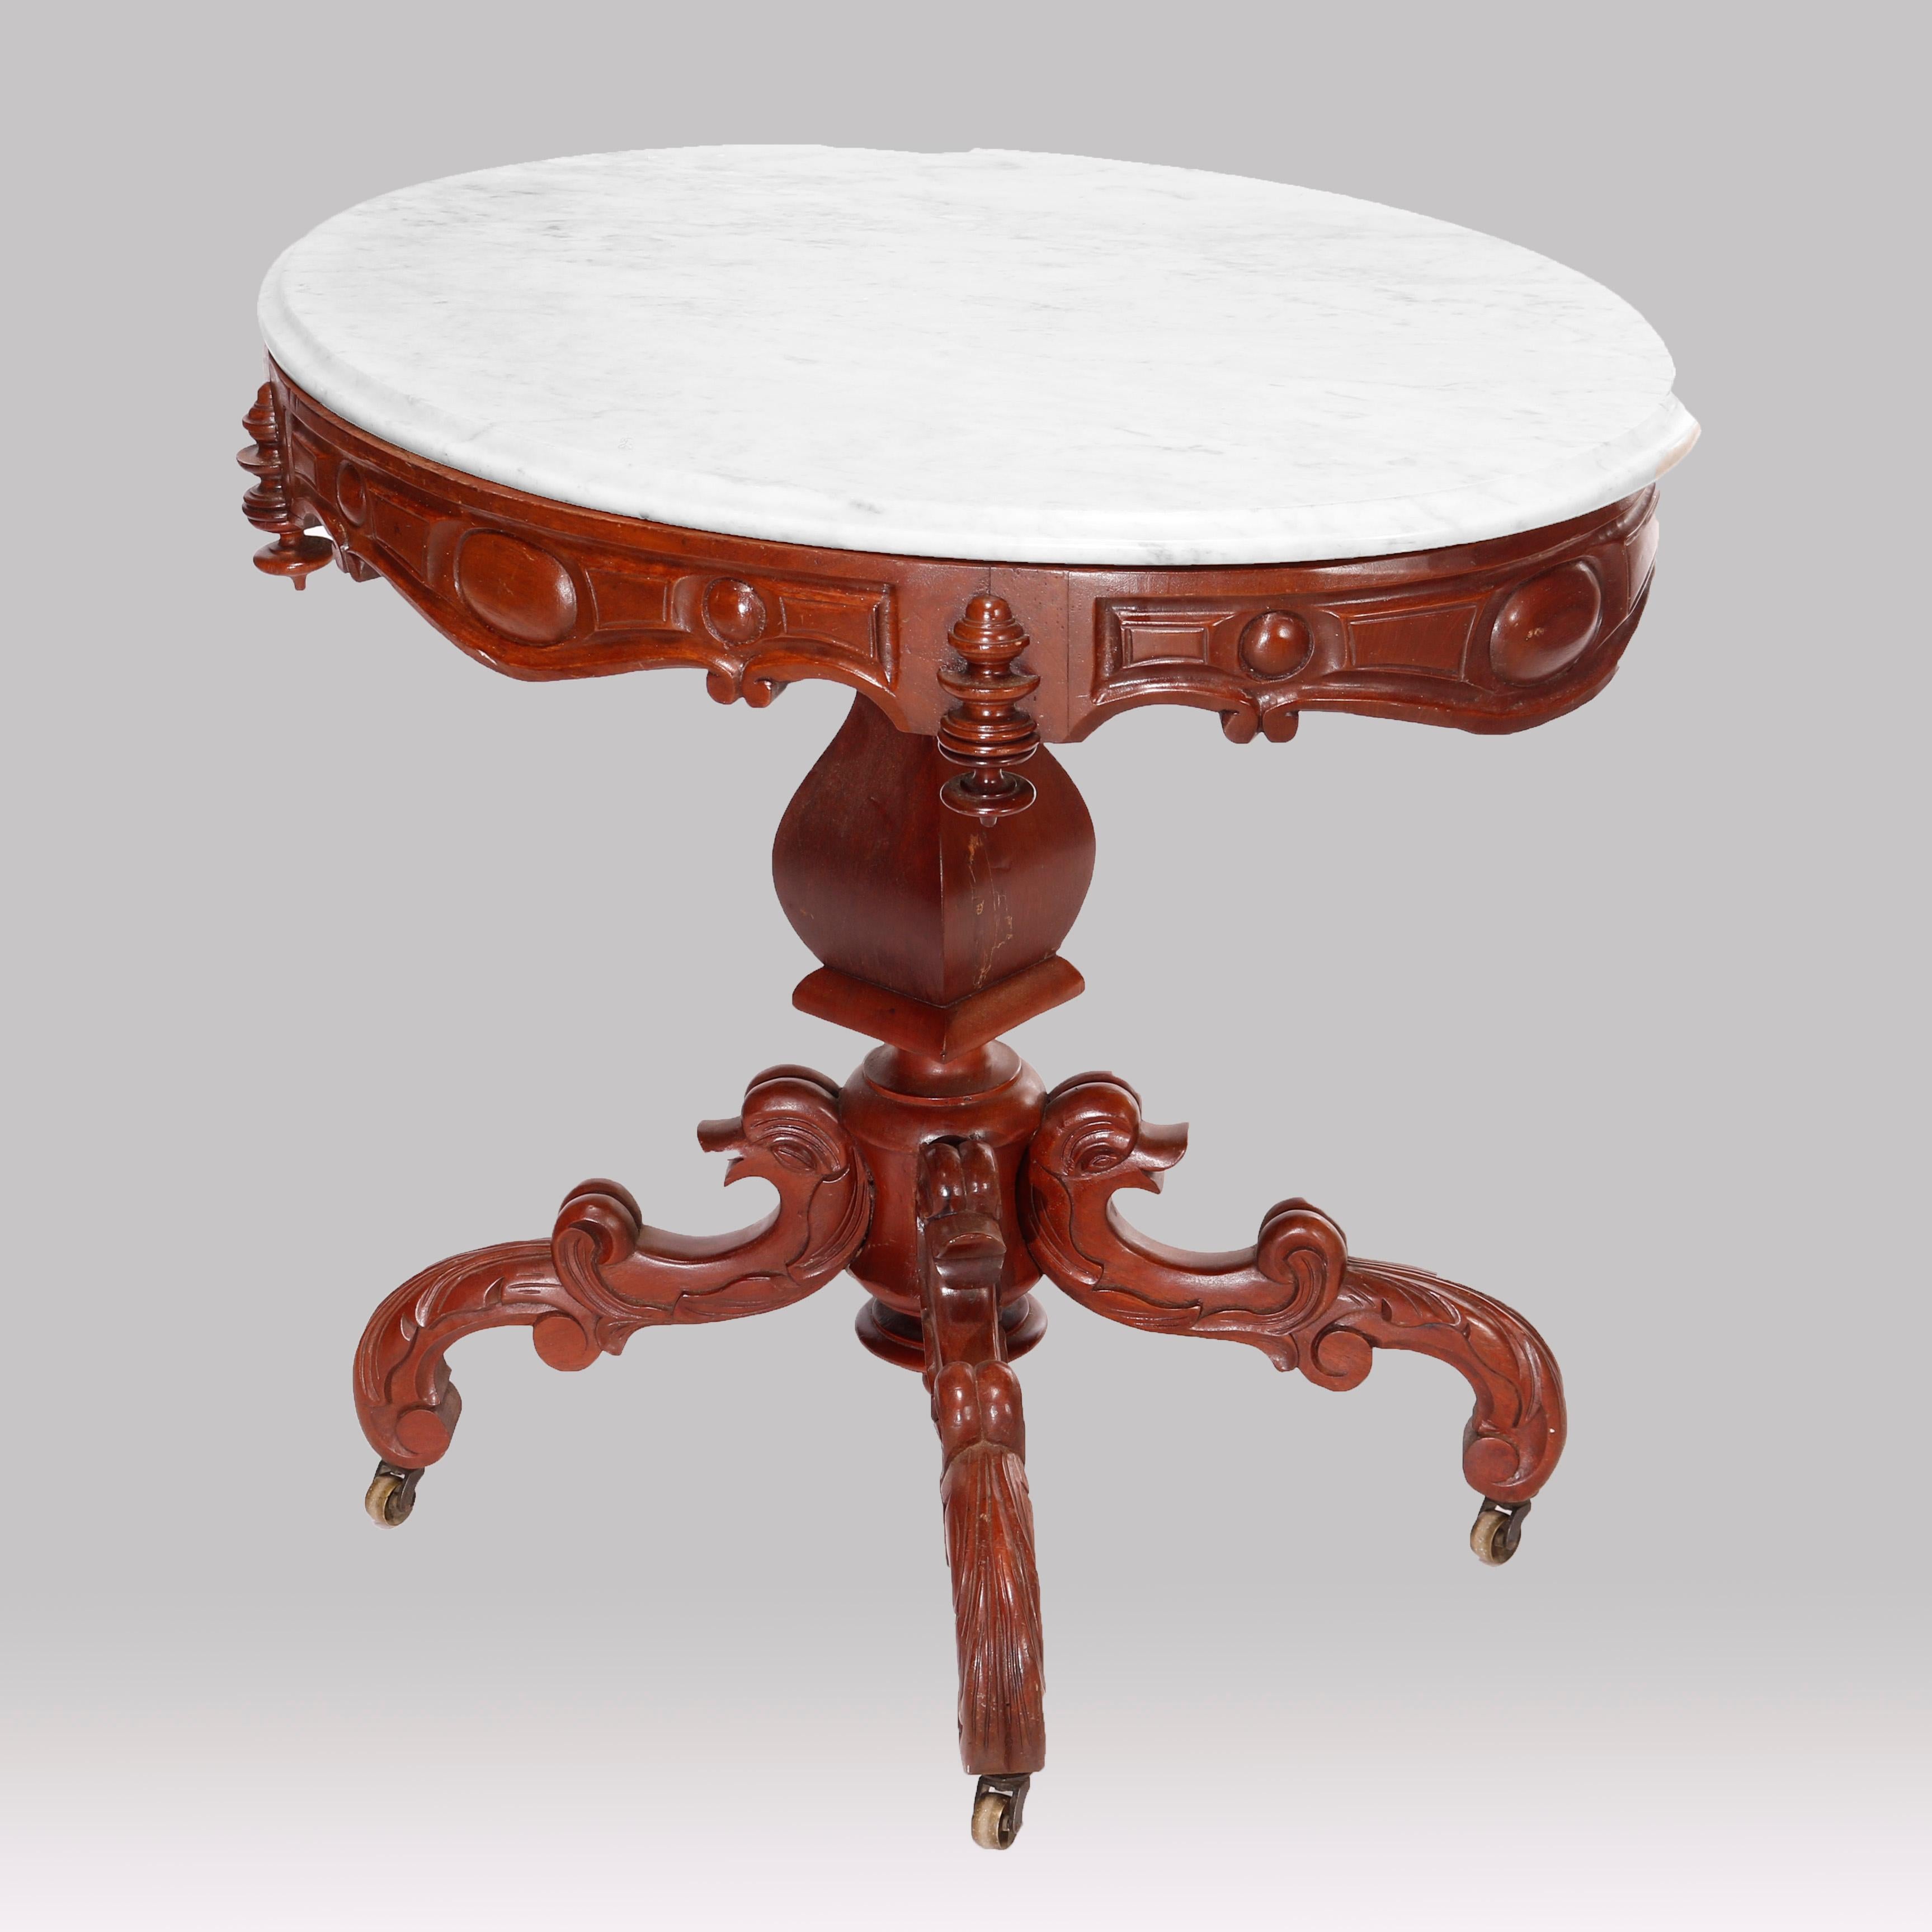 American Antique Renaissance Revival Figural Carved Oval Marble Top Parlor Table, c1880 For Sale